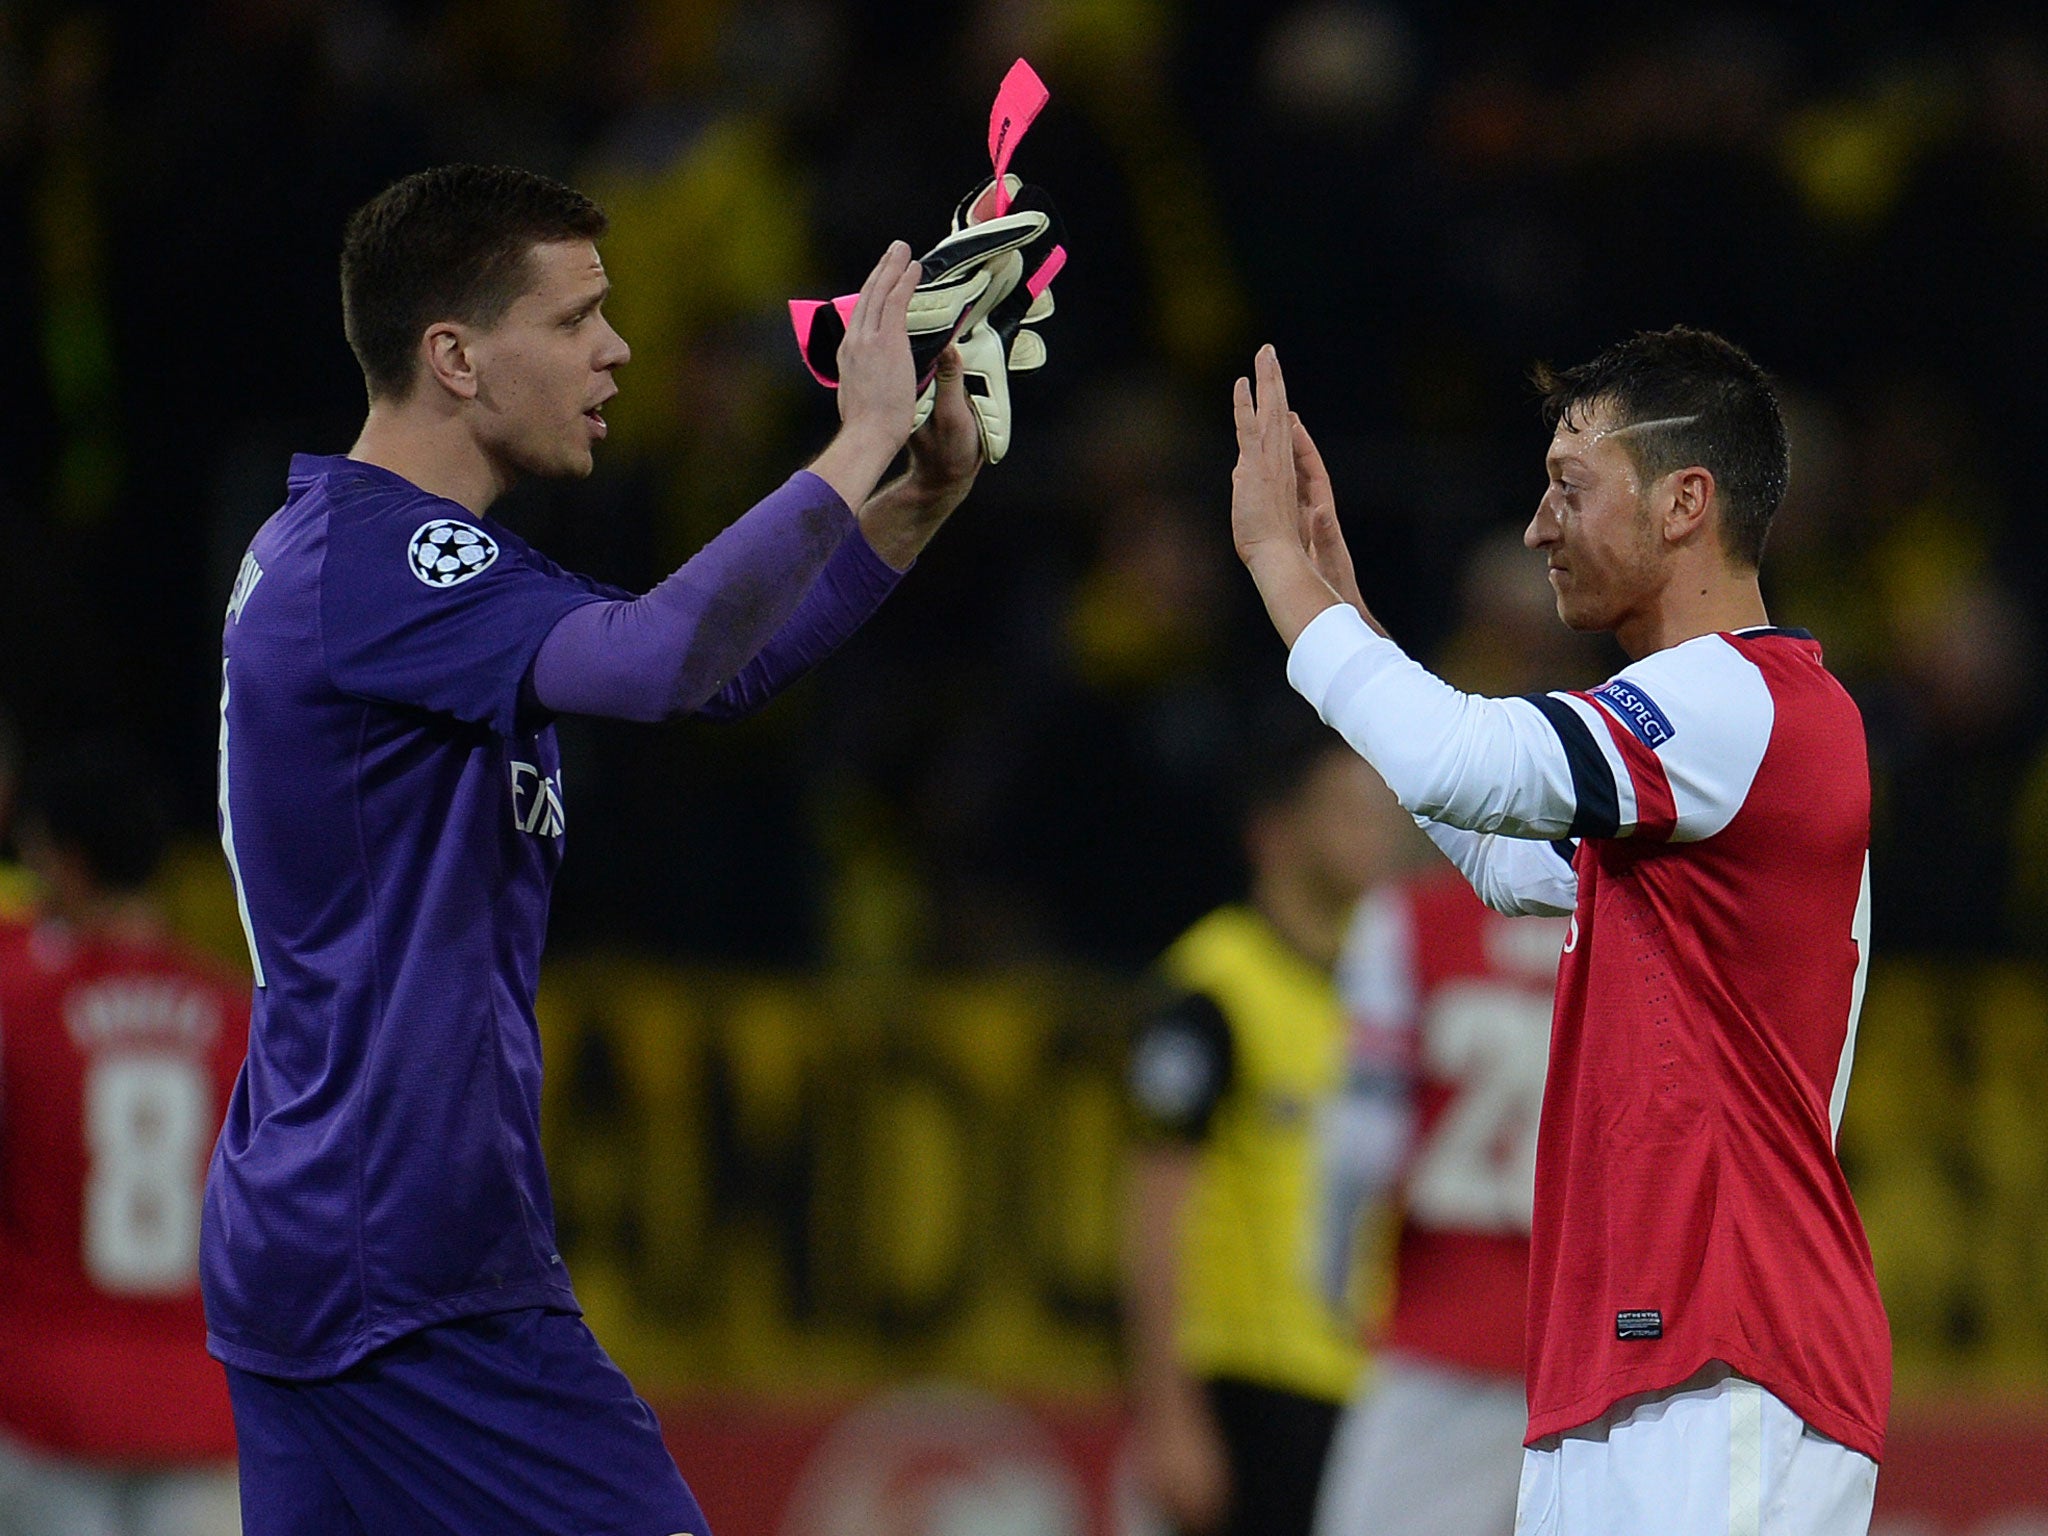 Wojciech Szczesny – 7 Polish goalkeeper made two terrific saves. He also conceded two goals, but they were both ruled offside